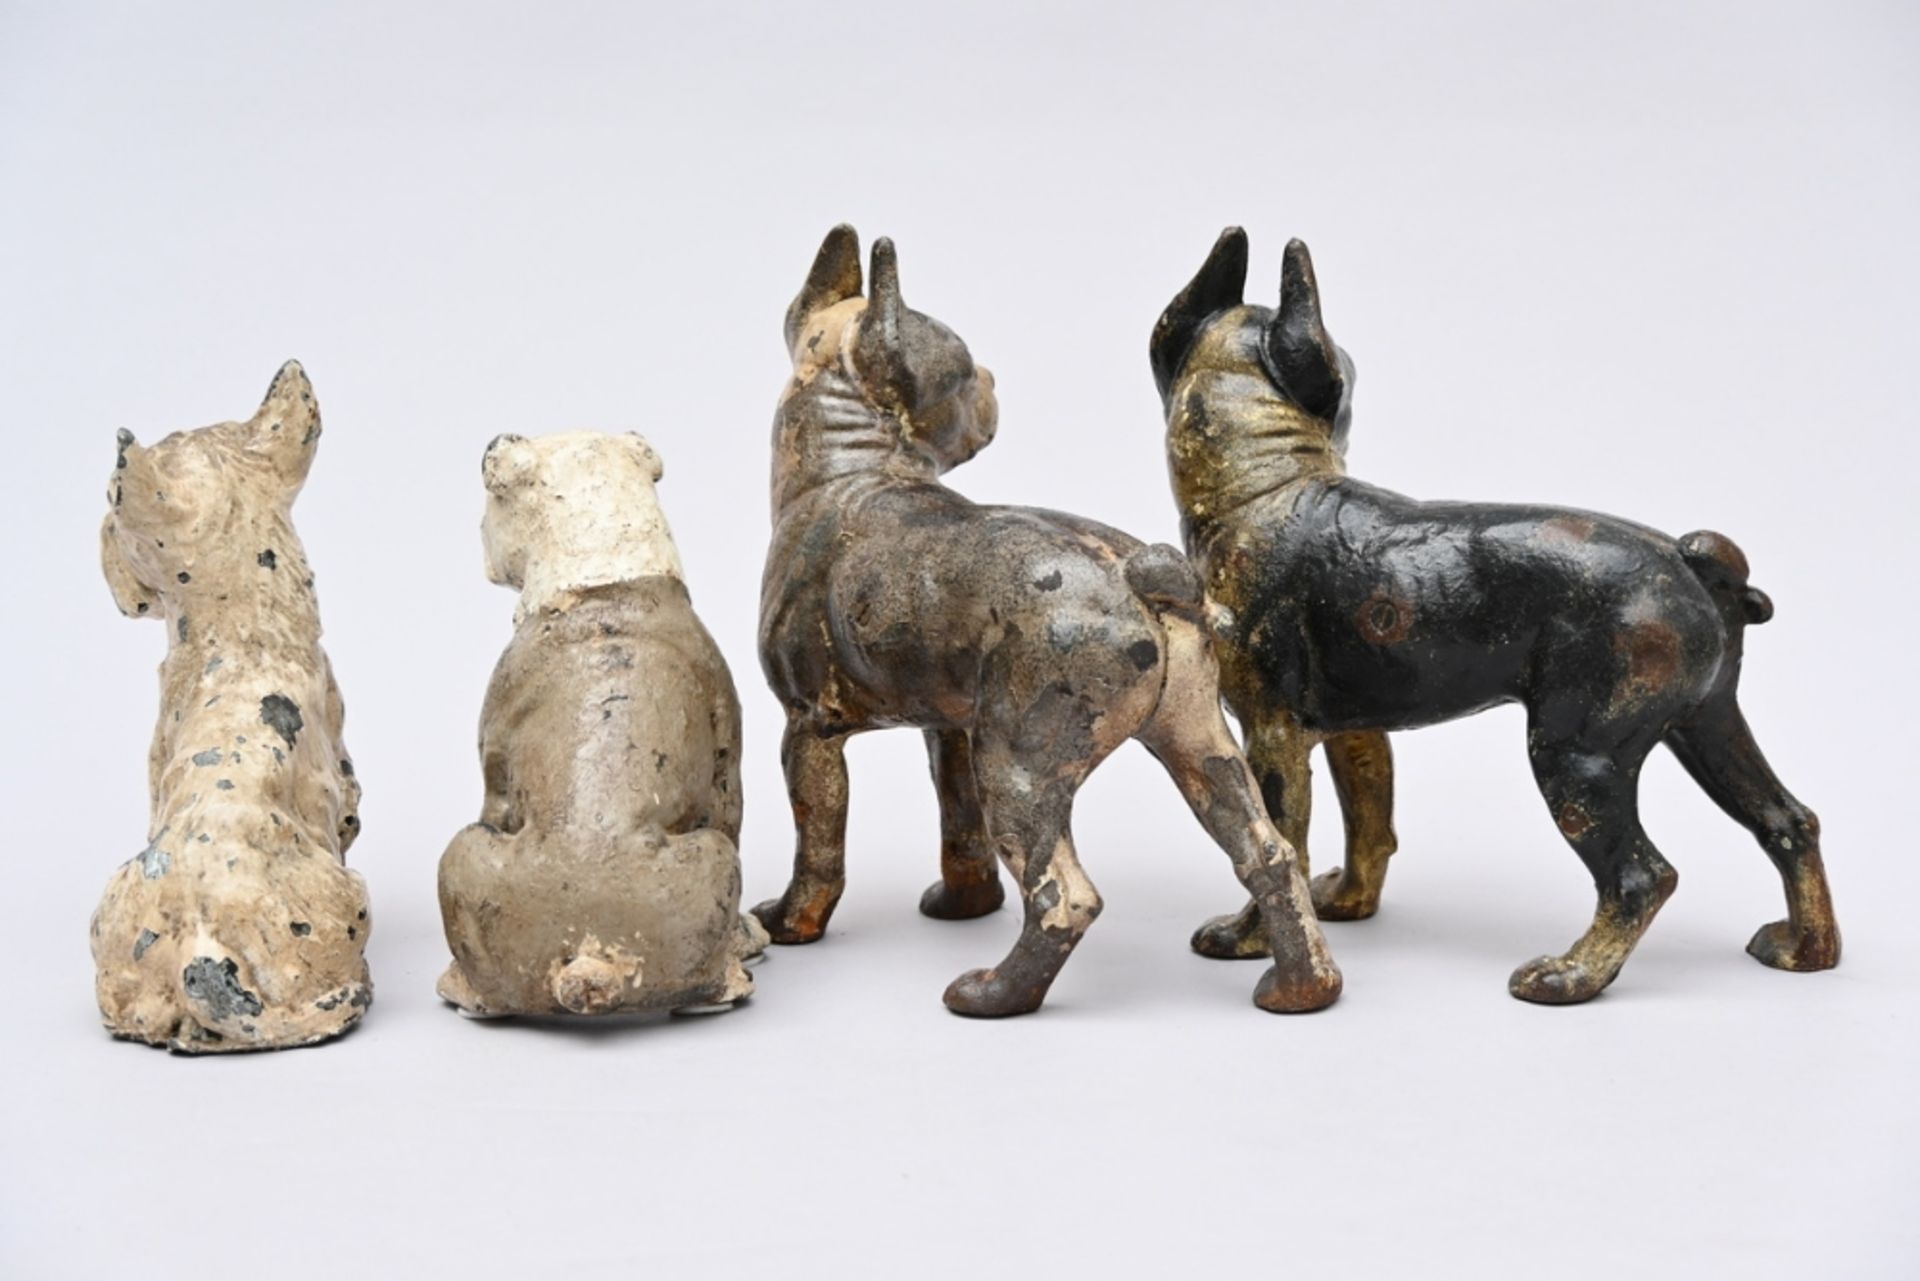 4 dogs in cast iron (h18.5 - 25cm) - Image 2 of 3